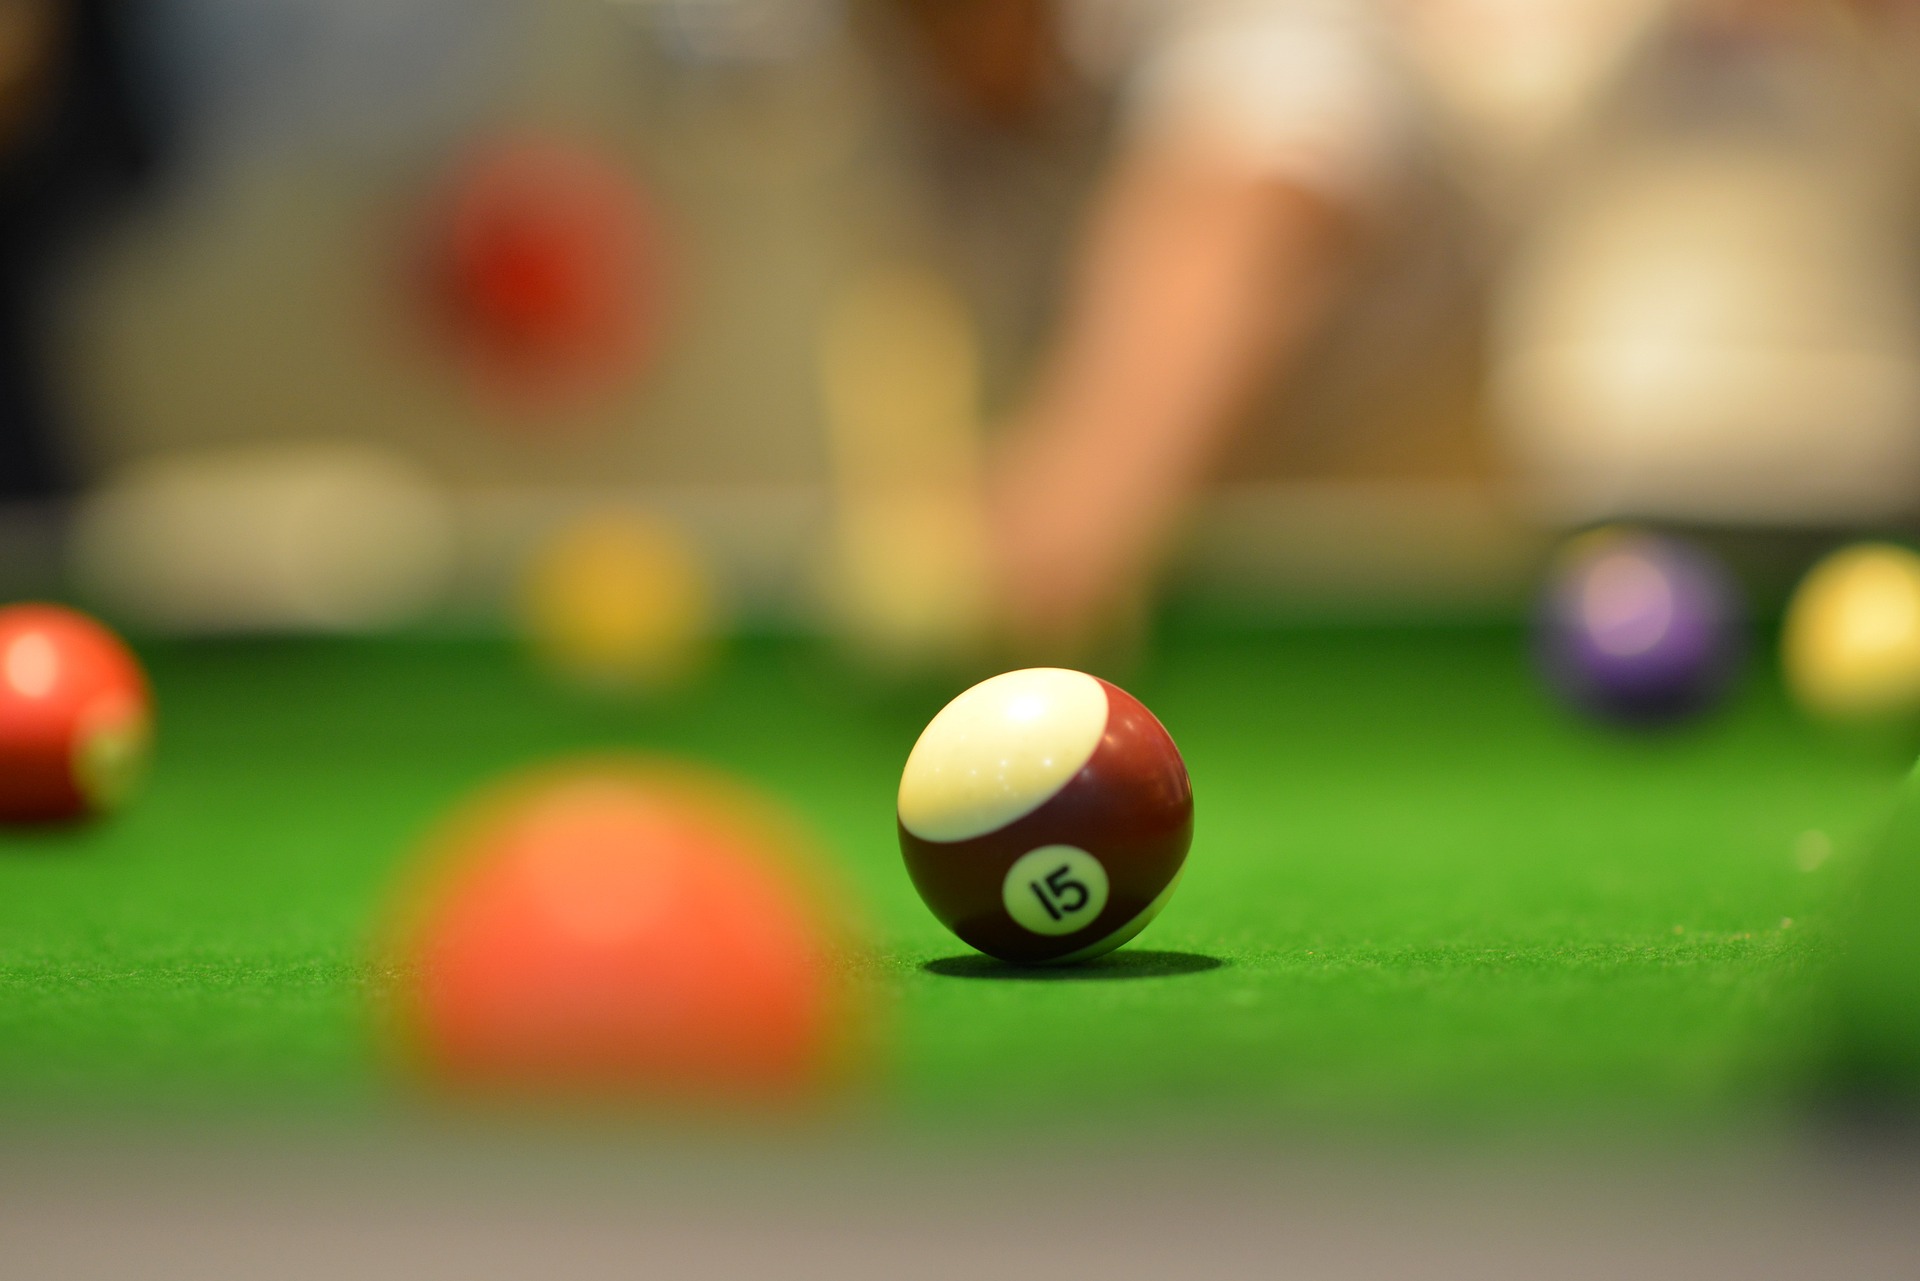 How To Control The Cue Ball In Pool?